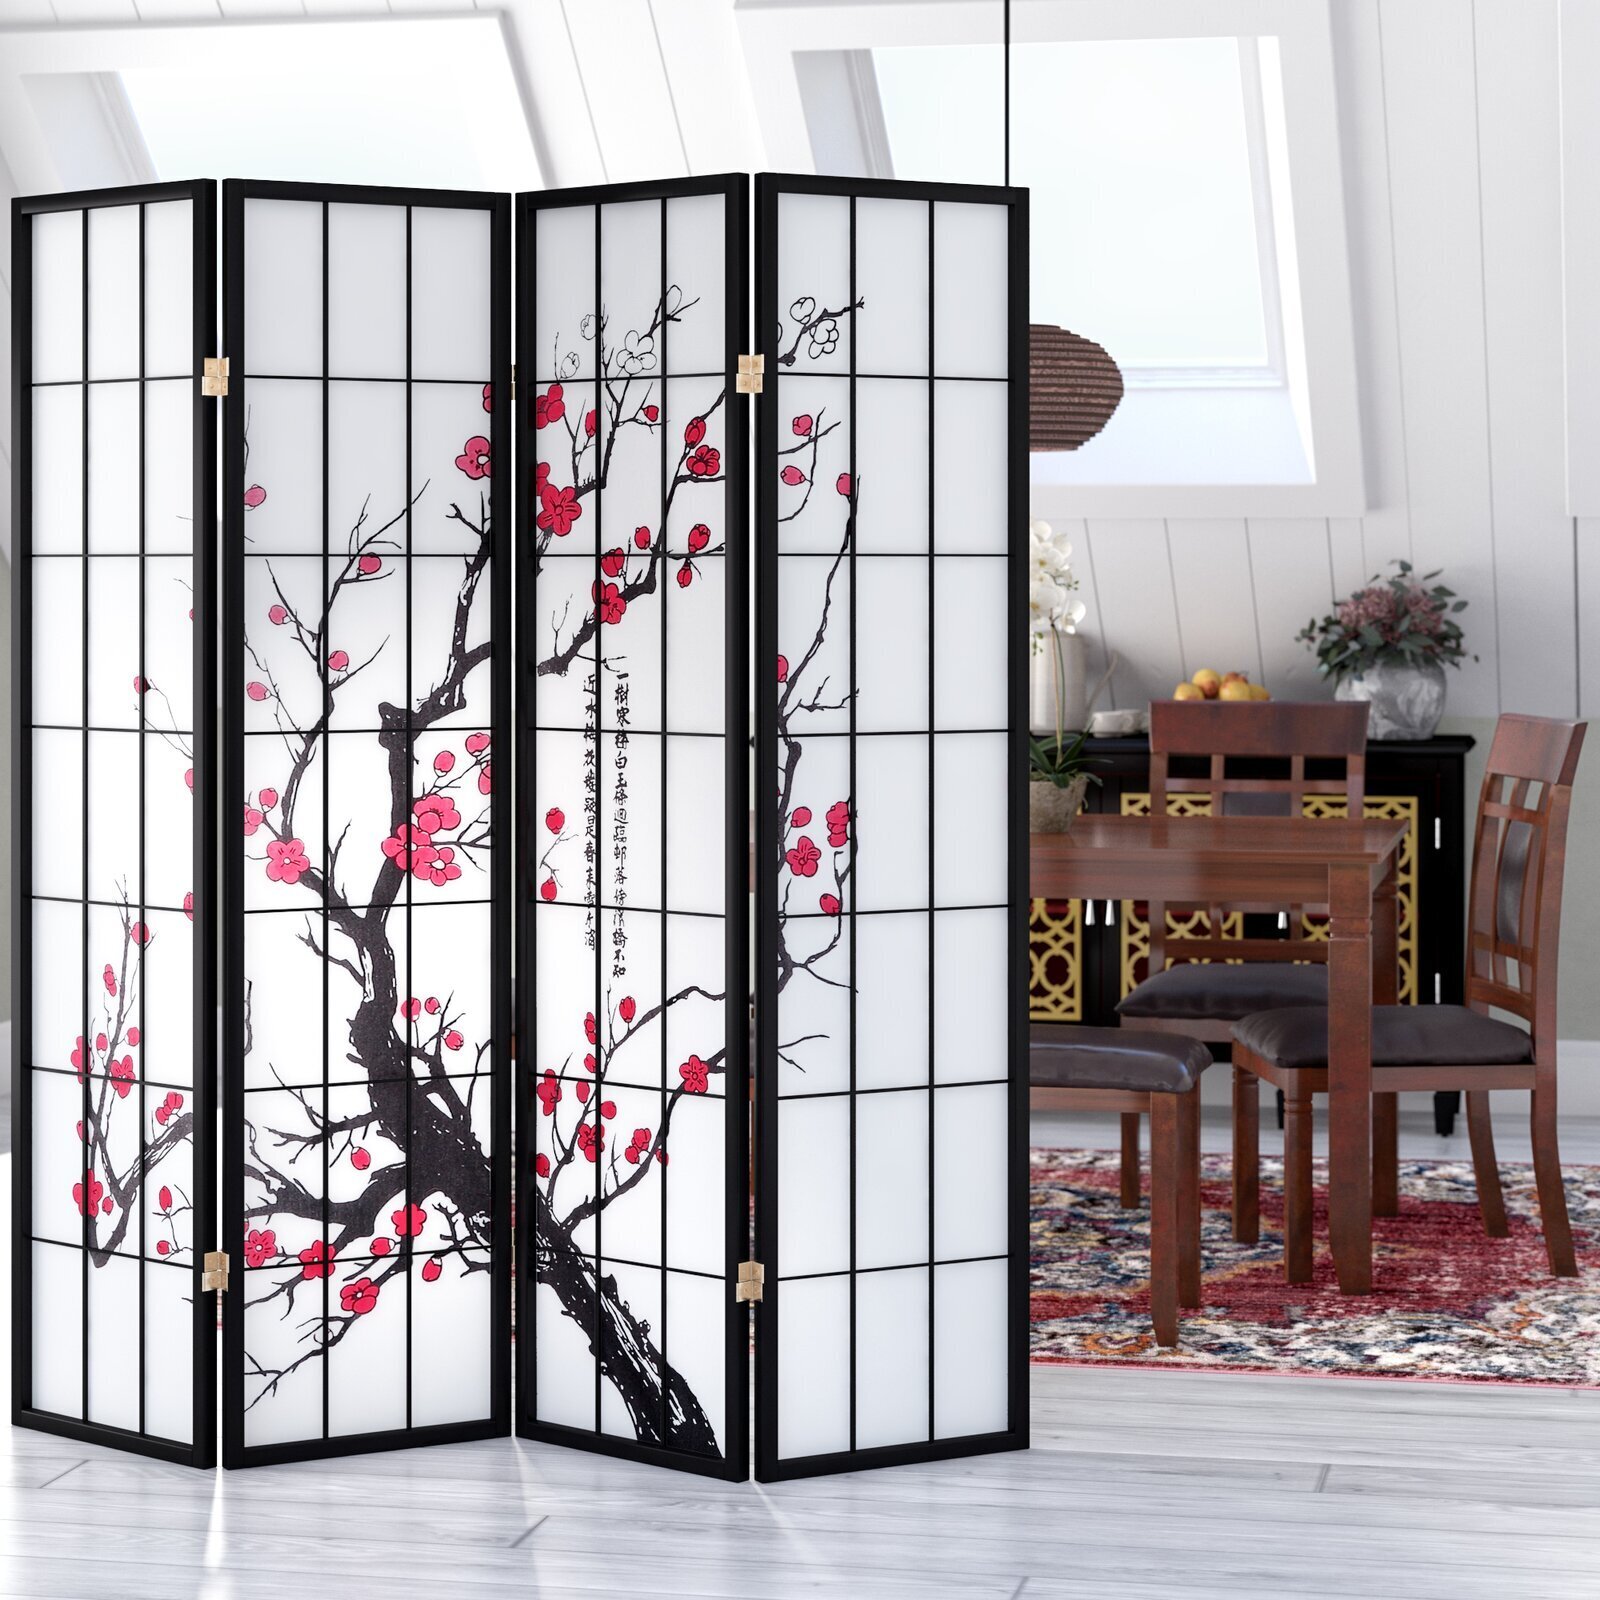 Decorative Floral Solid Partition Wall 